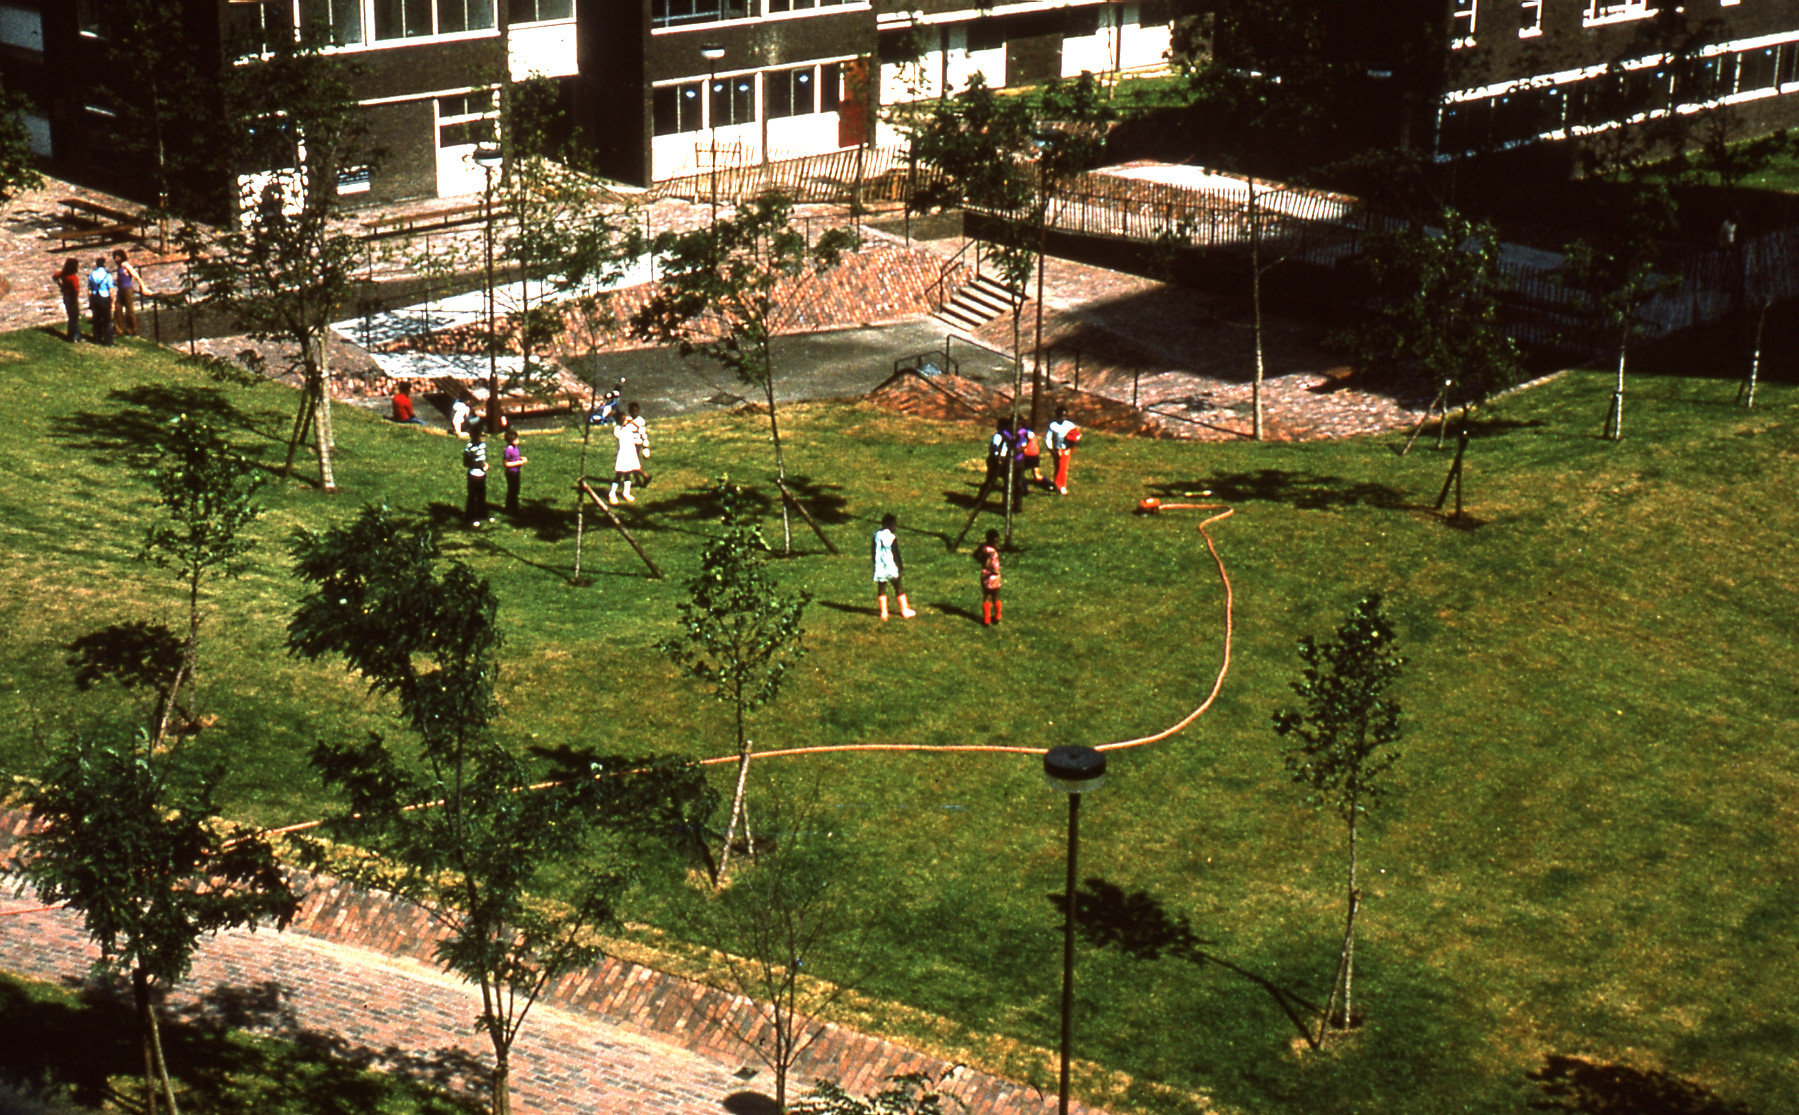 Photograph of children playing on a grassy area at the Brunel Estate in around 1974